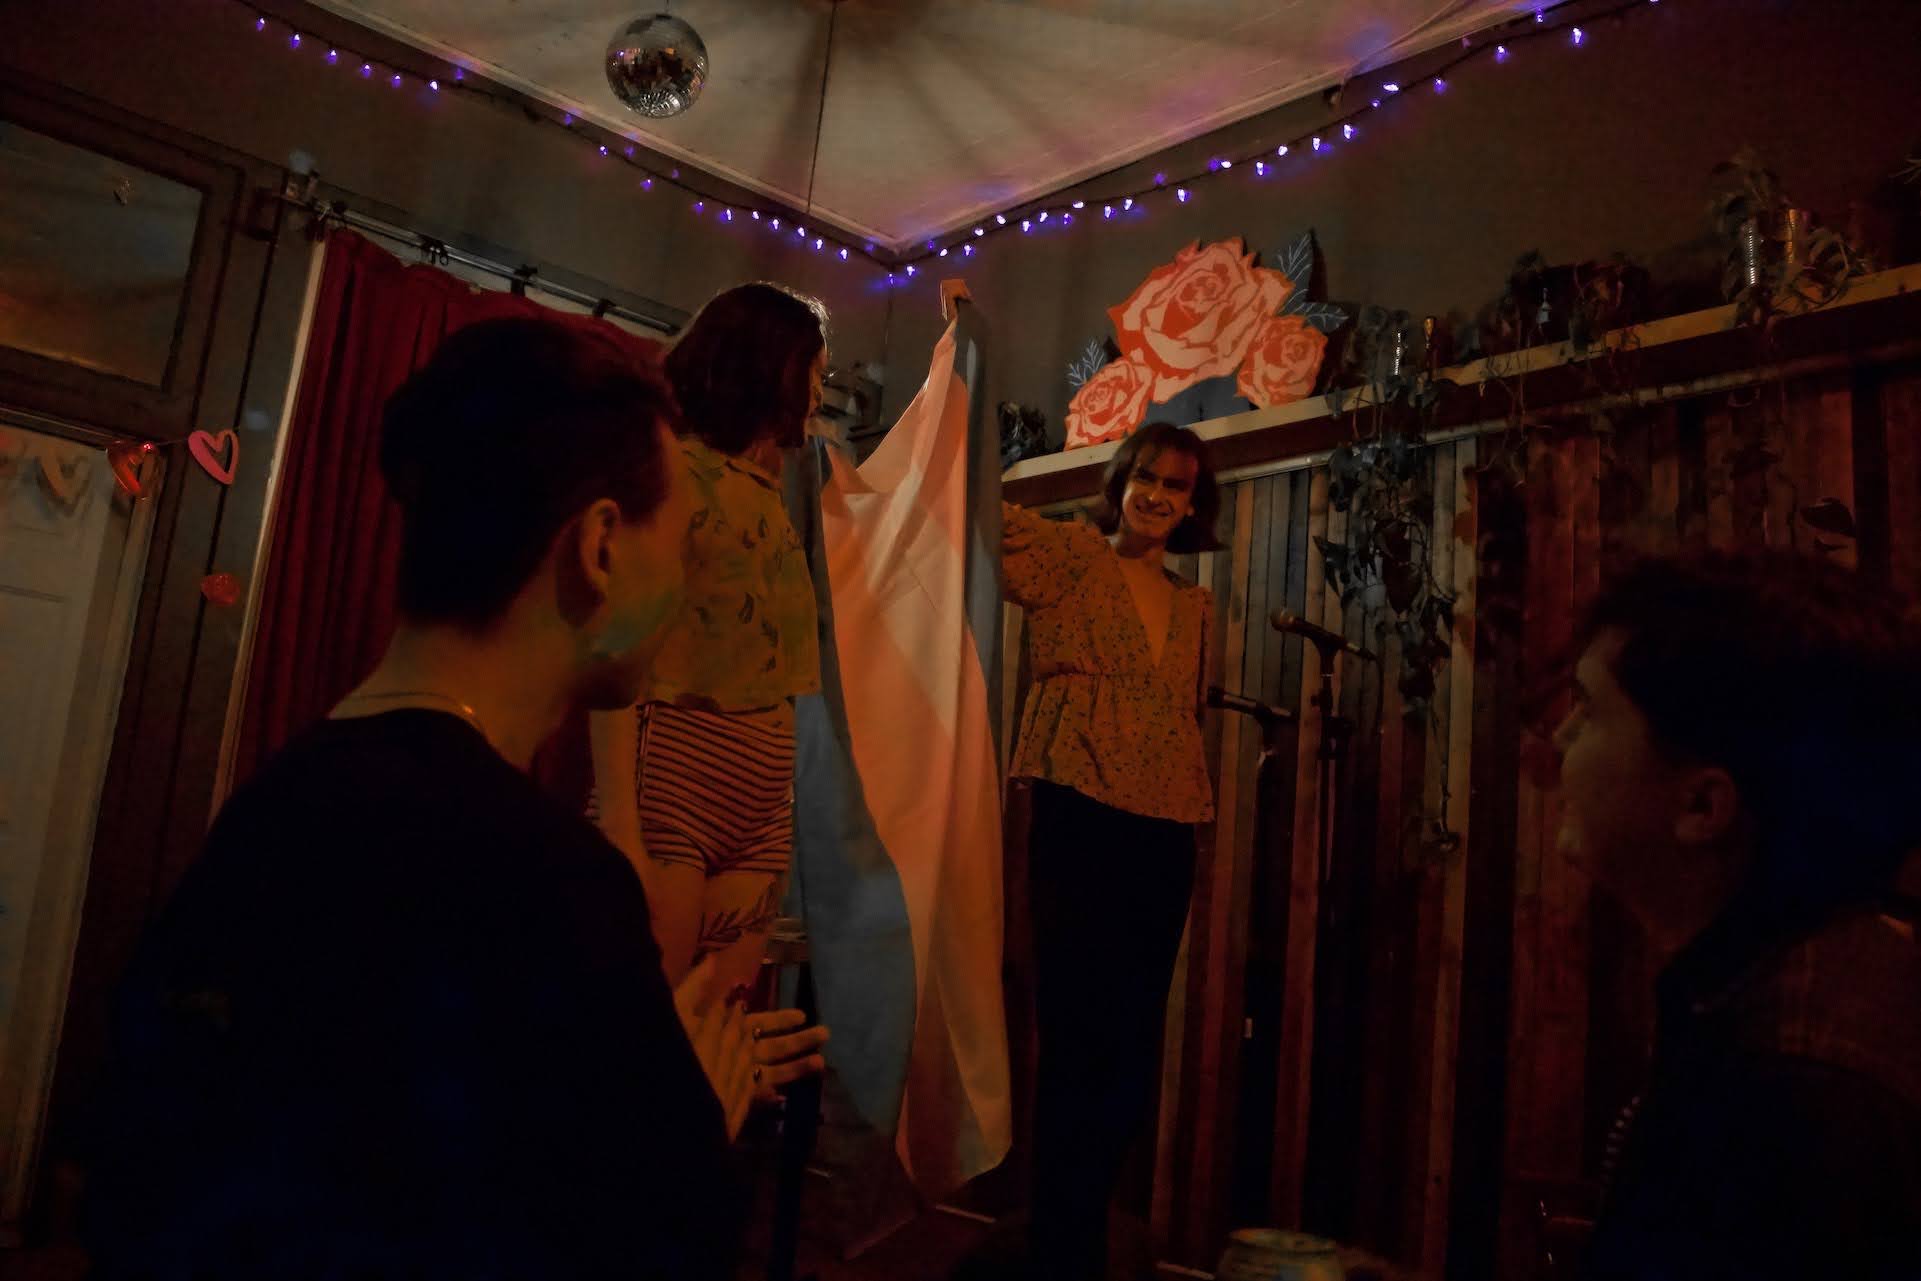 Two performers holding up a trans flag